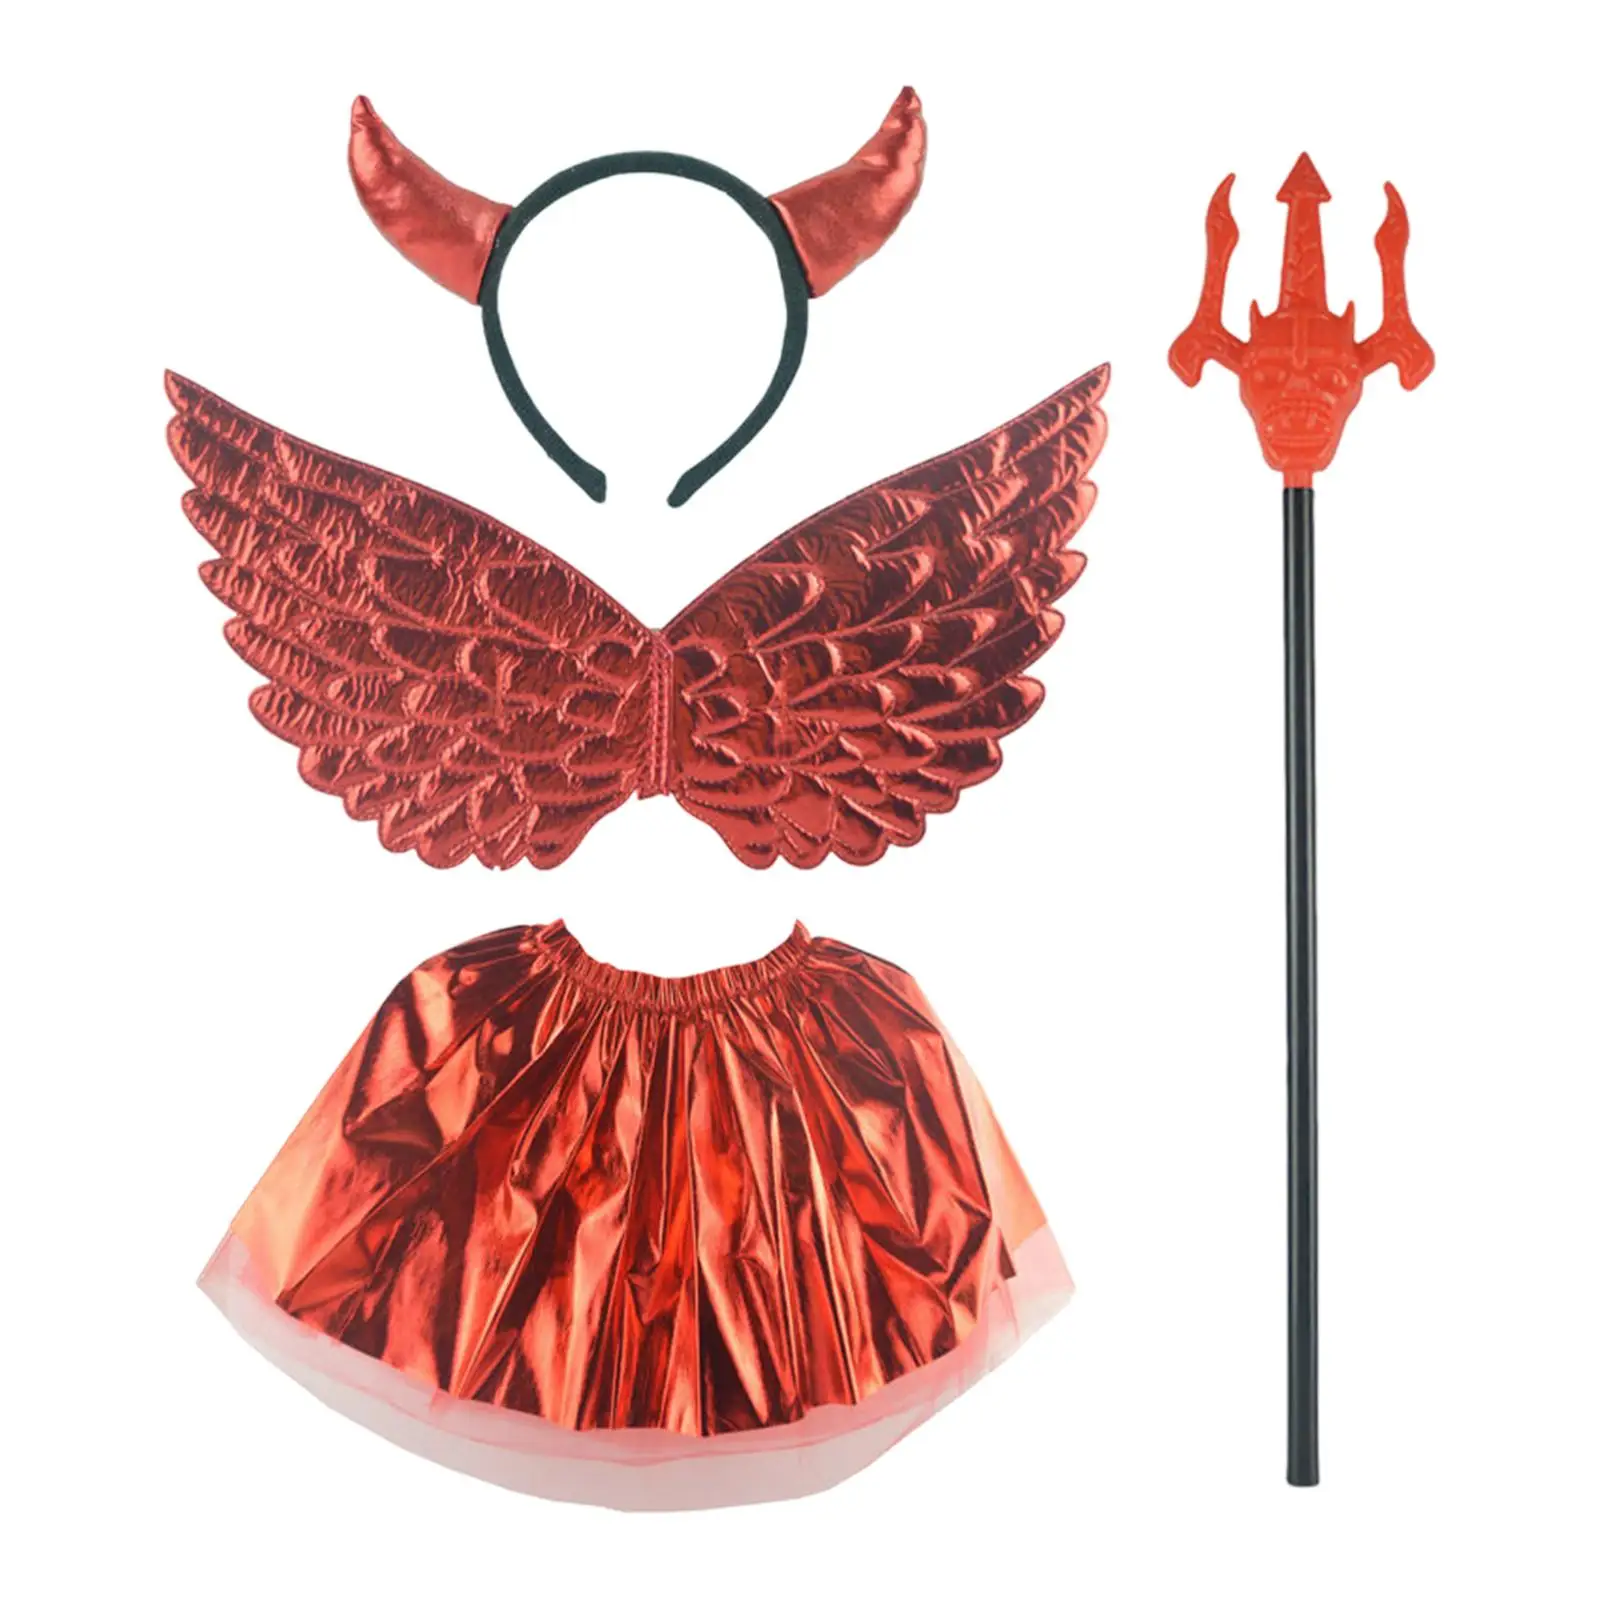 Girls Costume Decoration Hair Hoop Accessories Halloween Devil Costume Set for Stage Performance Prop Nightclub Child Stage Show